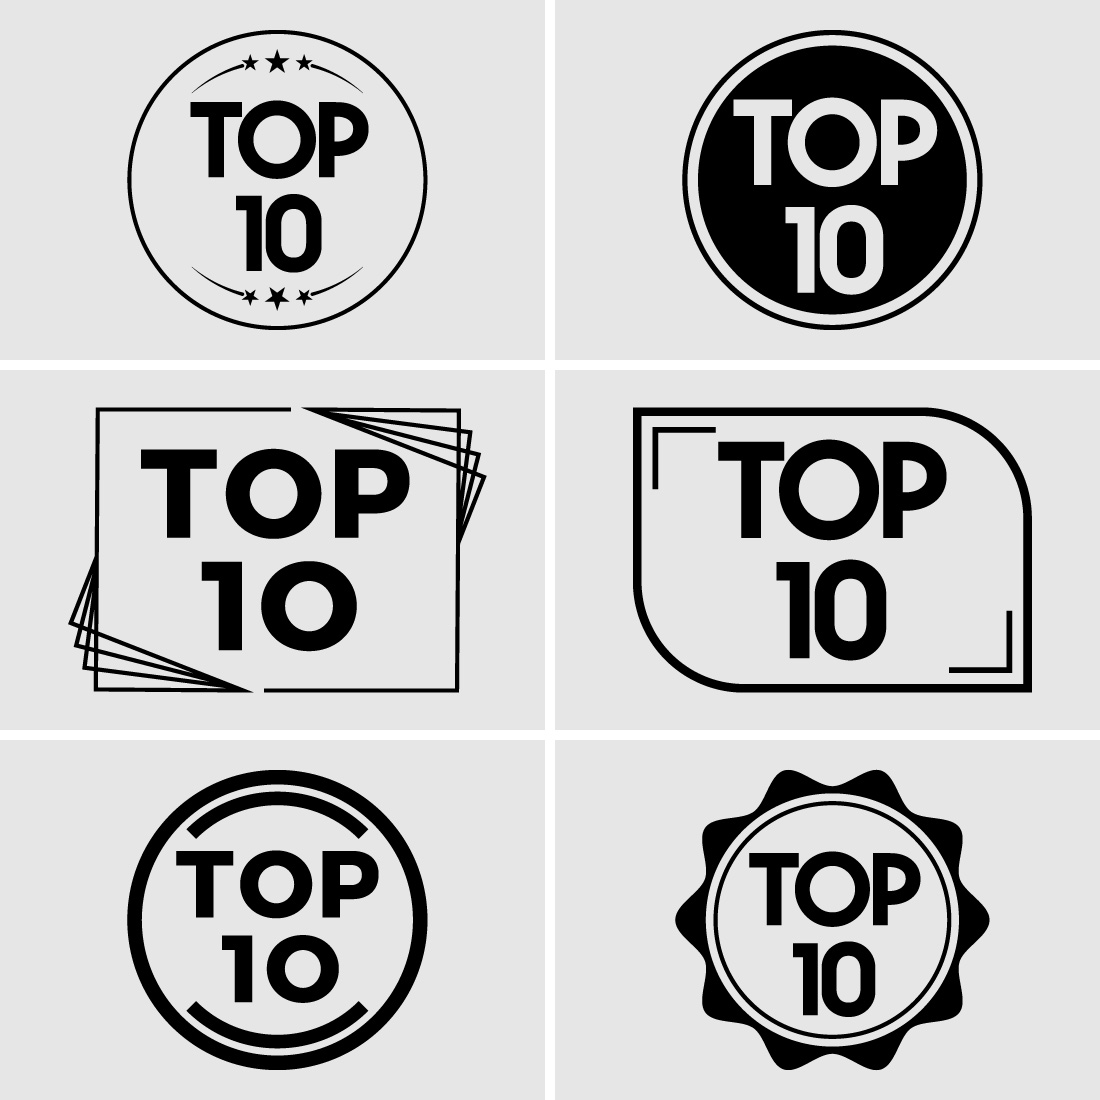 Top ten ranking and best of the best rank Top 10 golden signs for music videos or other content, Vector illustration preview image.